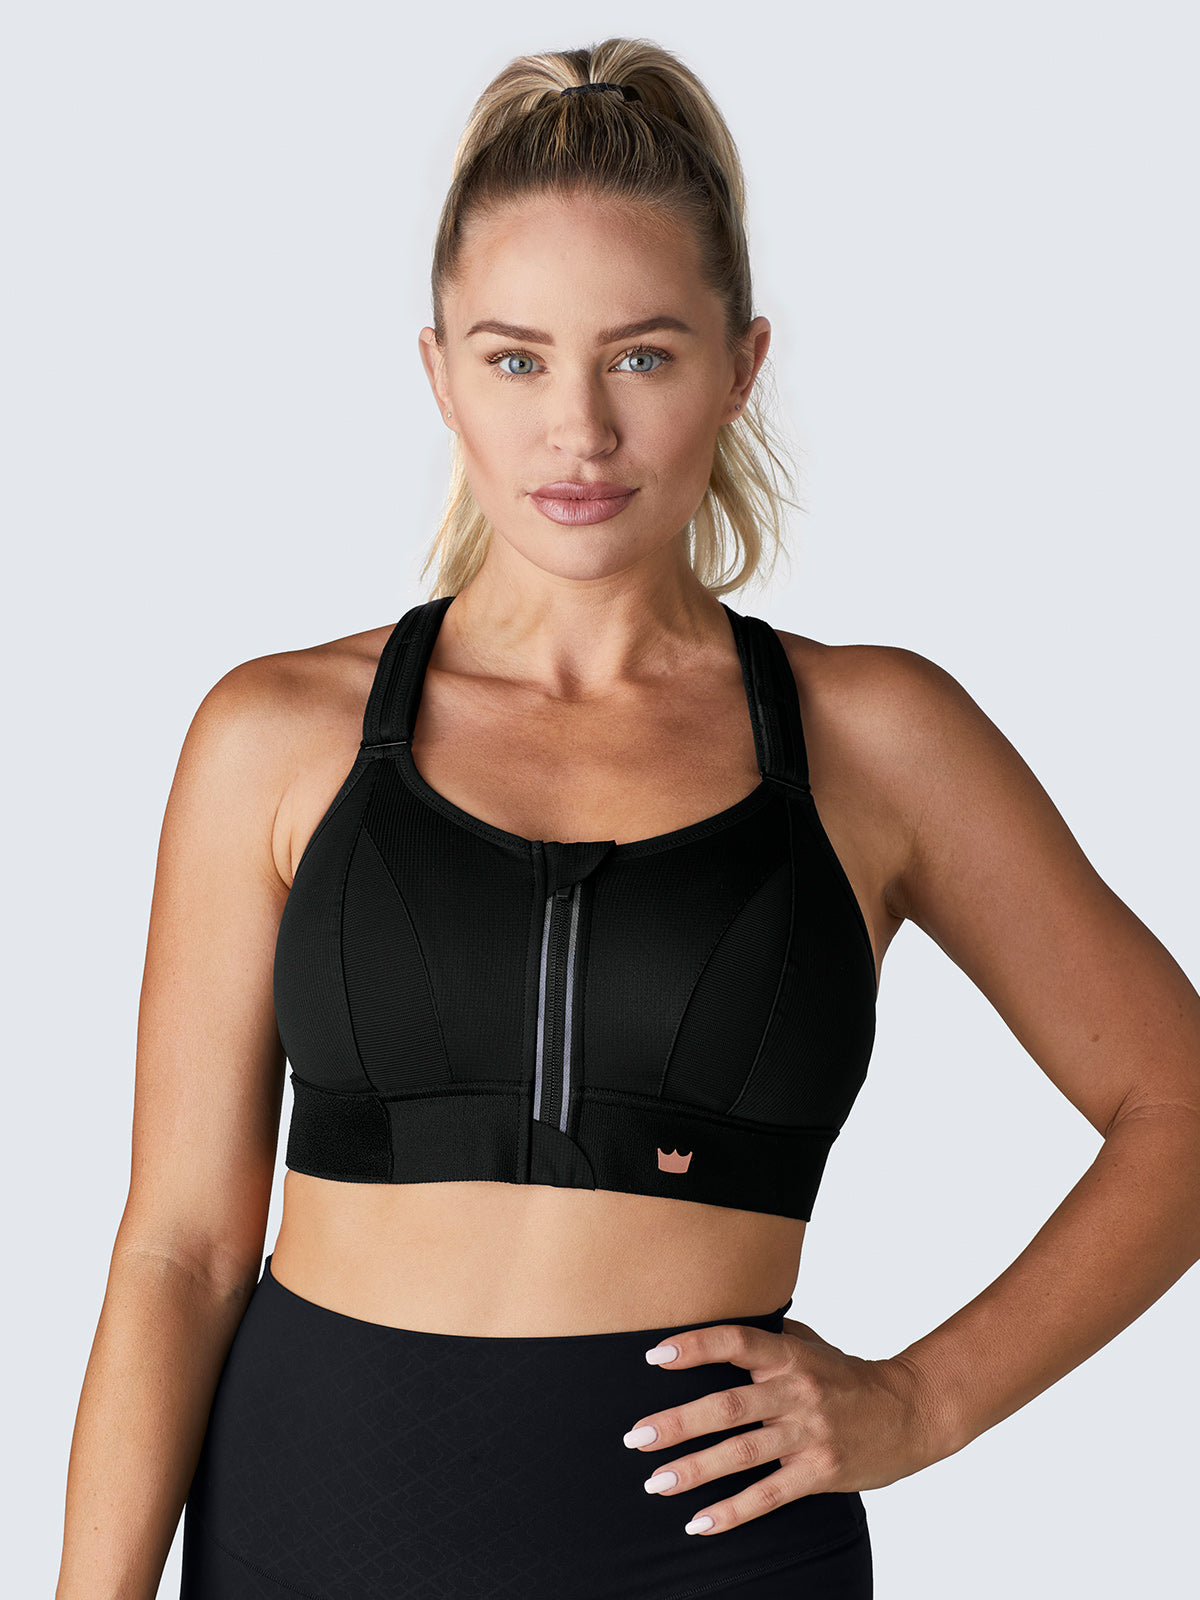 Tips: How to pick the best Sports Bra for all workouts